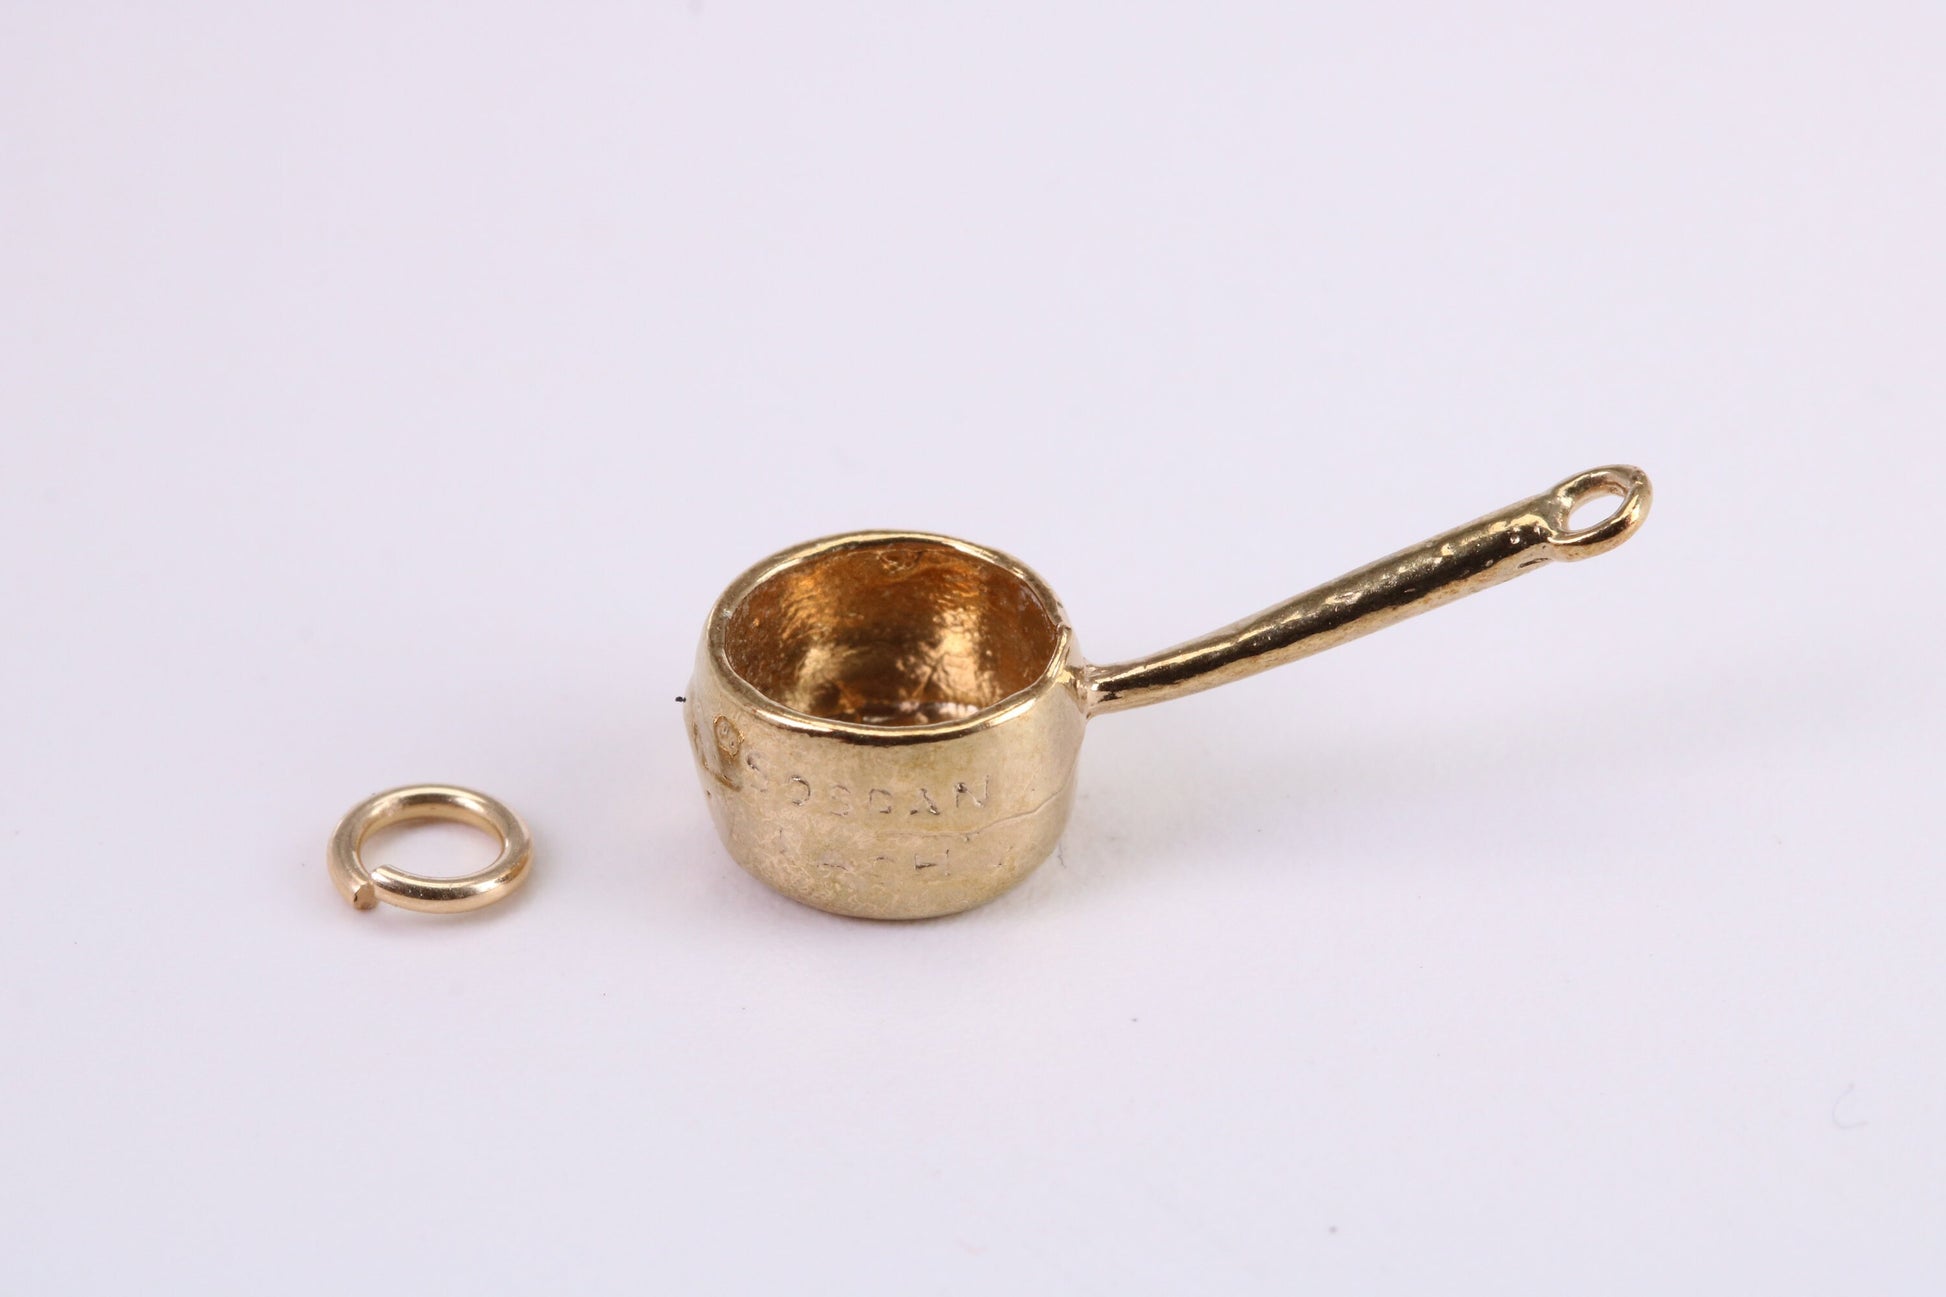 Sauce Pan Charm, Traditional Charm, Made from Solid Yellow Gold, British Hallmarked , Complete with Attachment Link